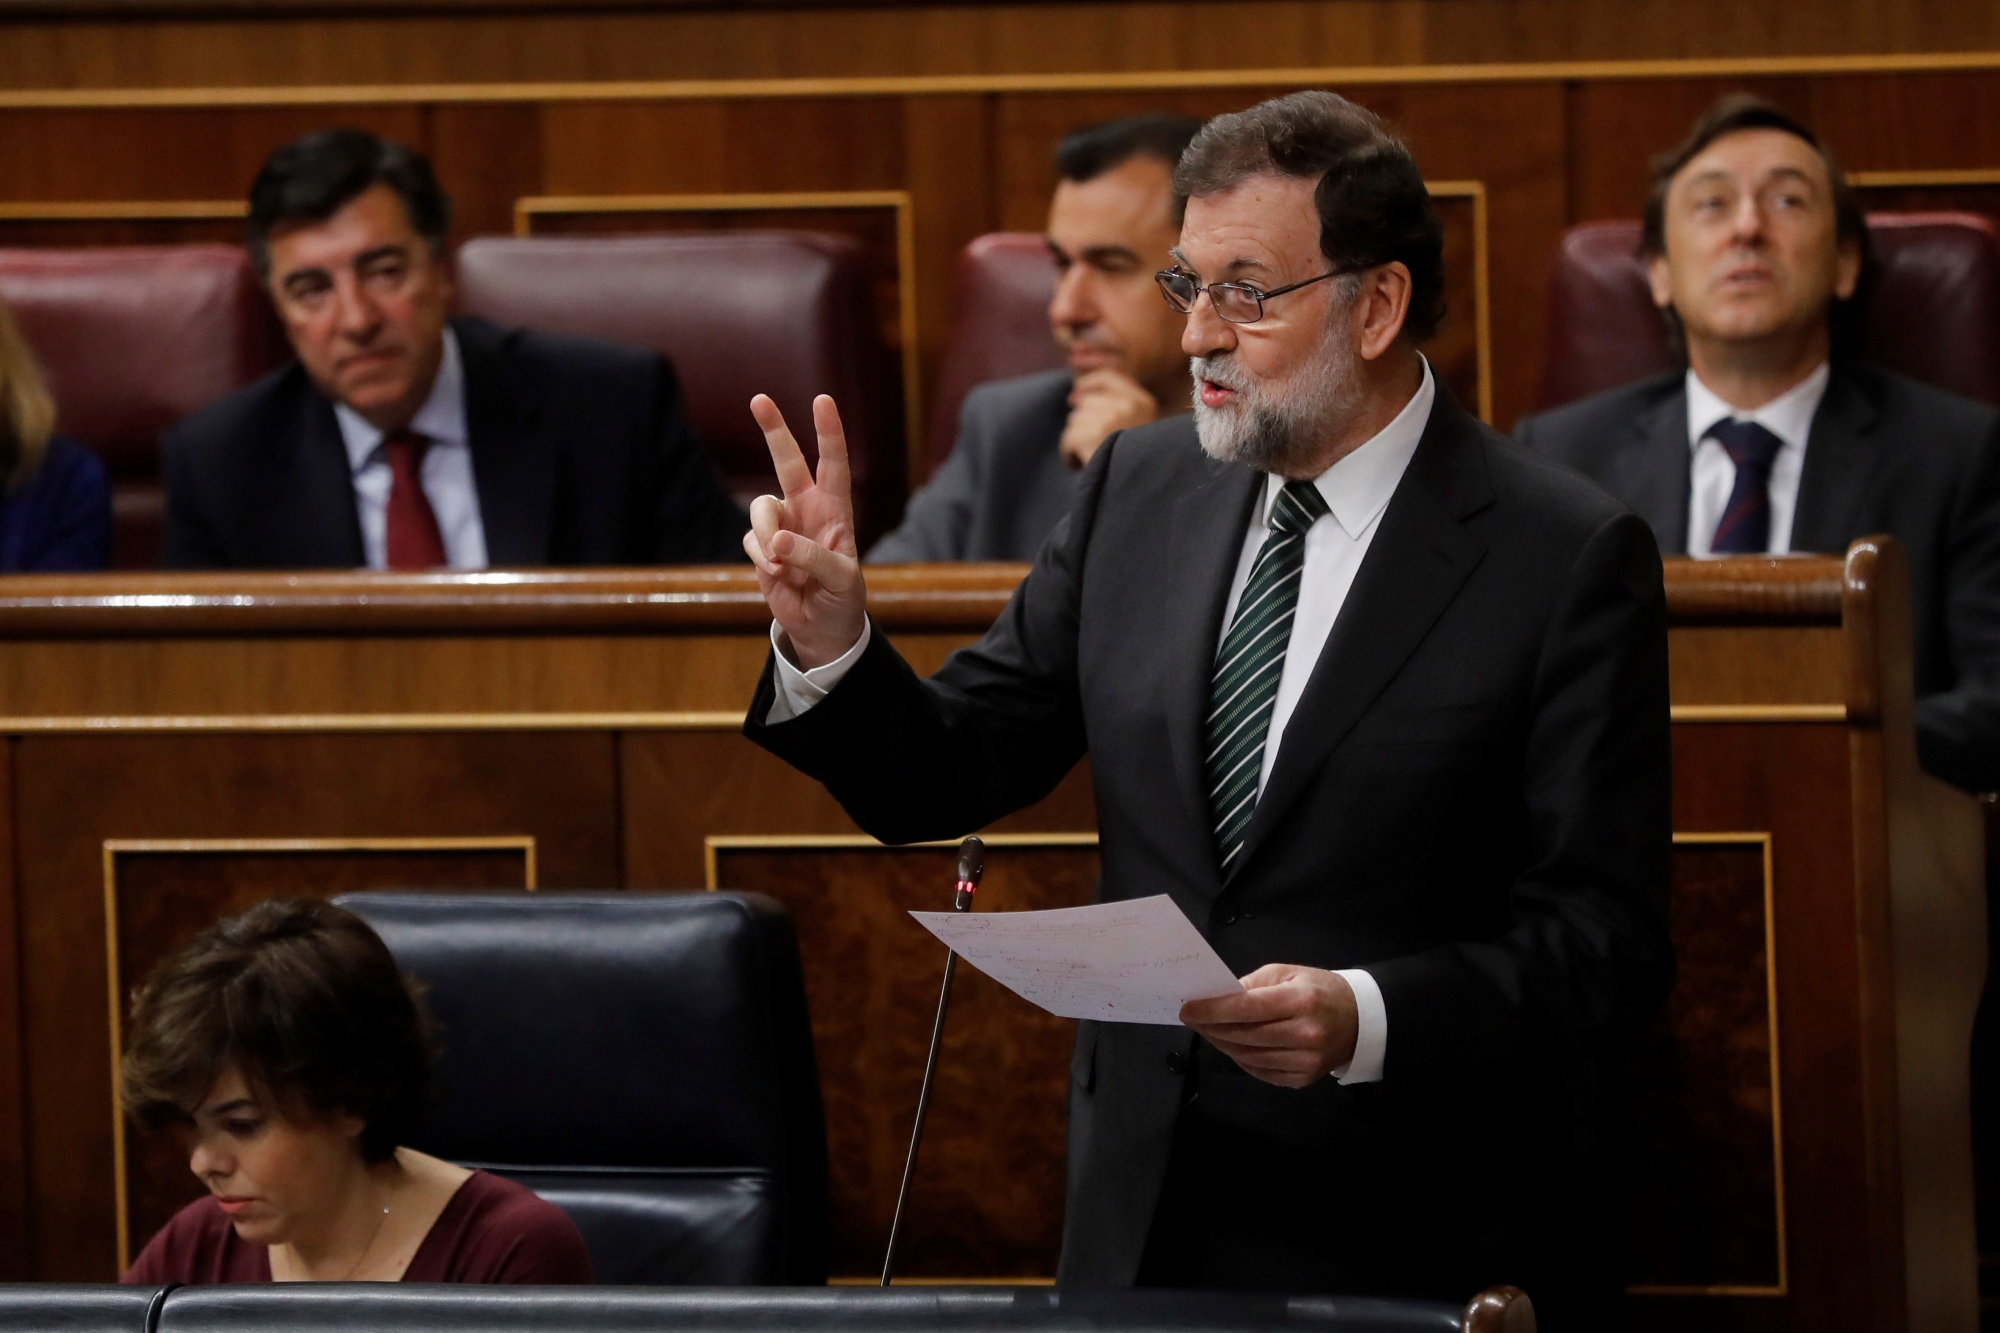 epa06272662 Spanish Prime Minister, Mariano Rajoy, delivers a speech during Question Time at the Lower House in Madrid, Spain, 18 October 2017.  EPA/Juan Carlos Hidalgo SPAIN GOVERNMENT